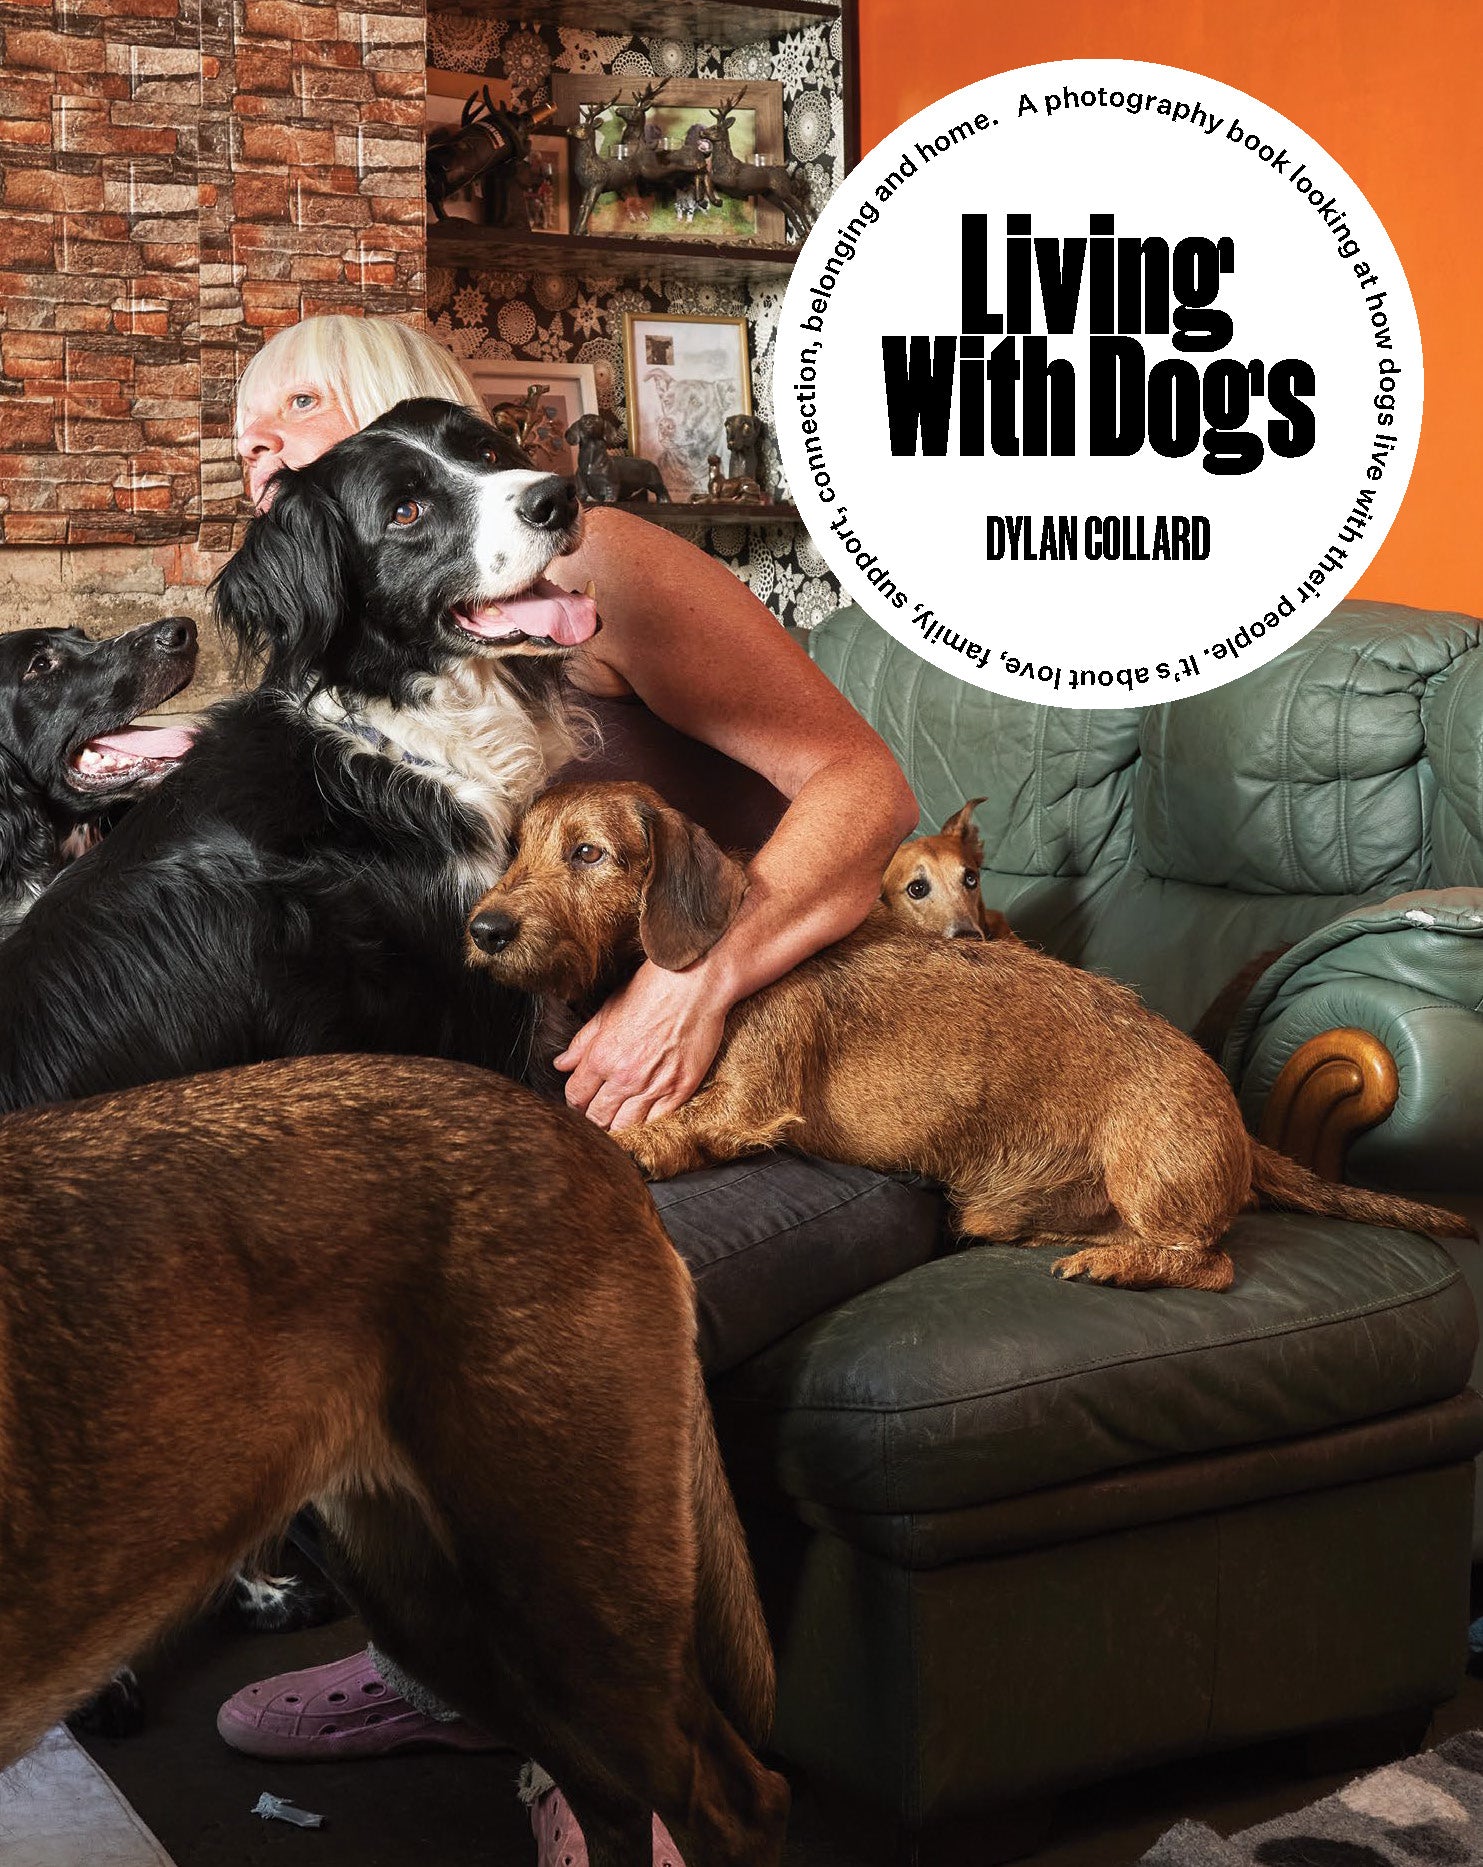 Living with Dogs by Dylan Collard